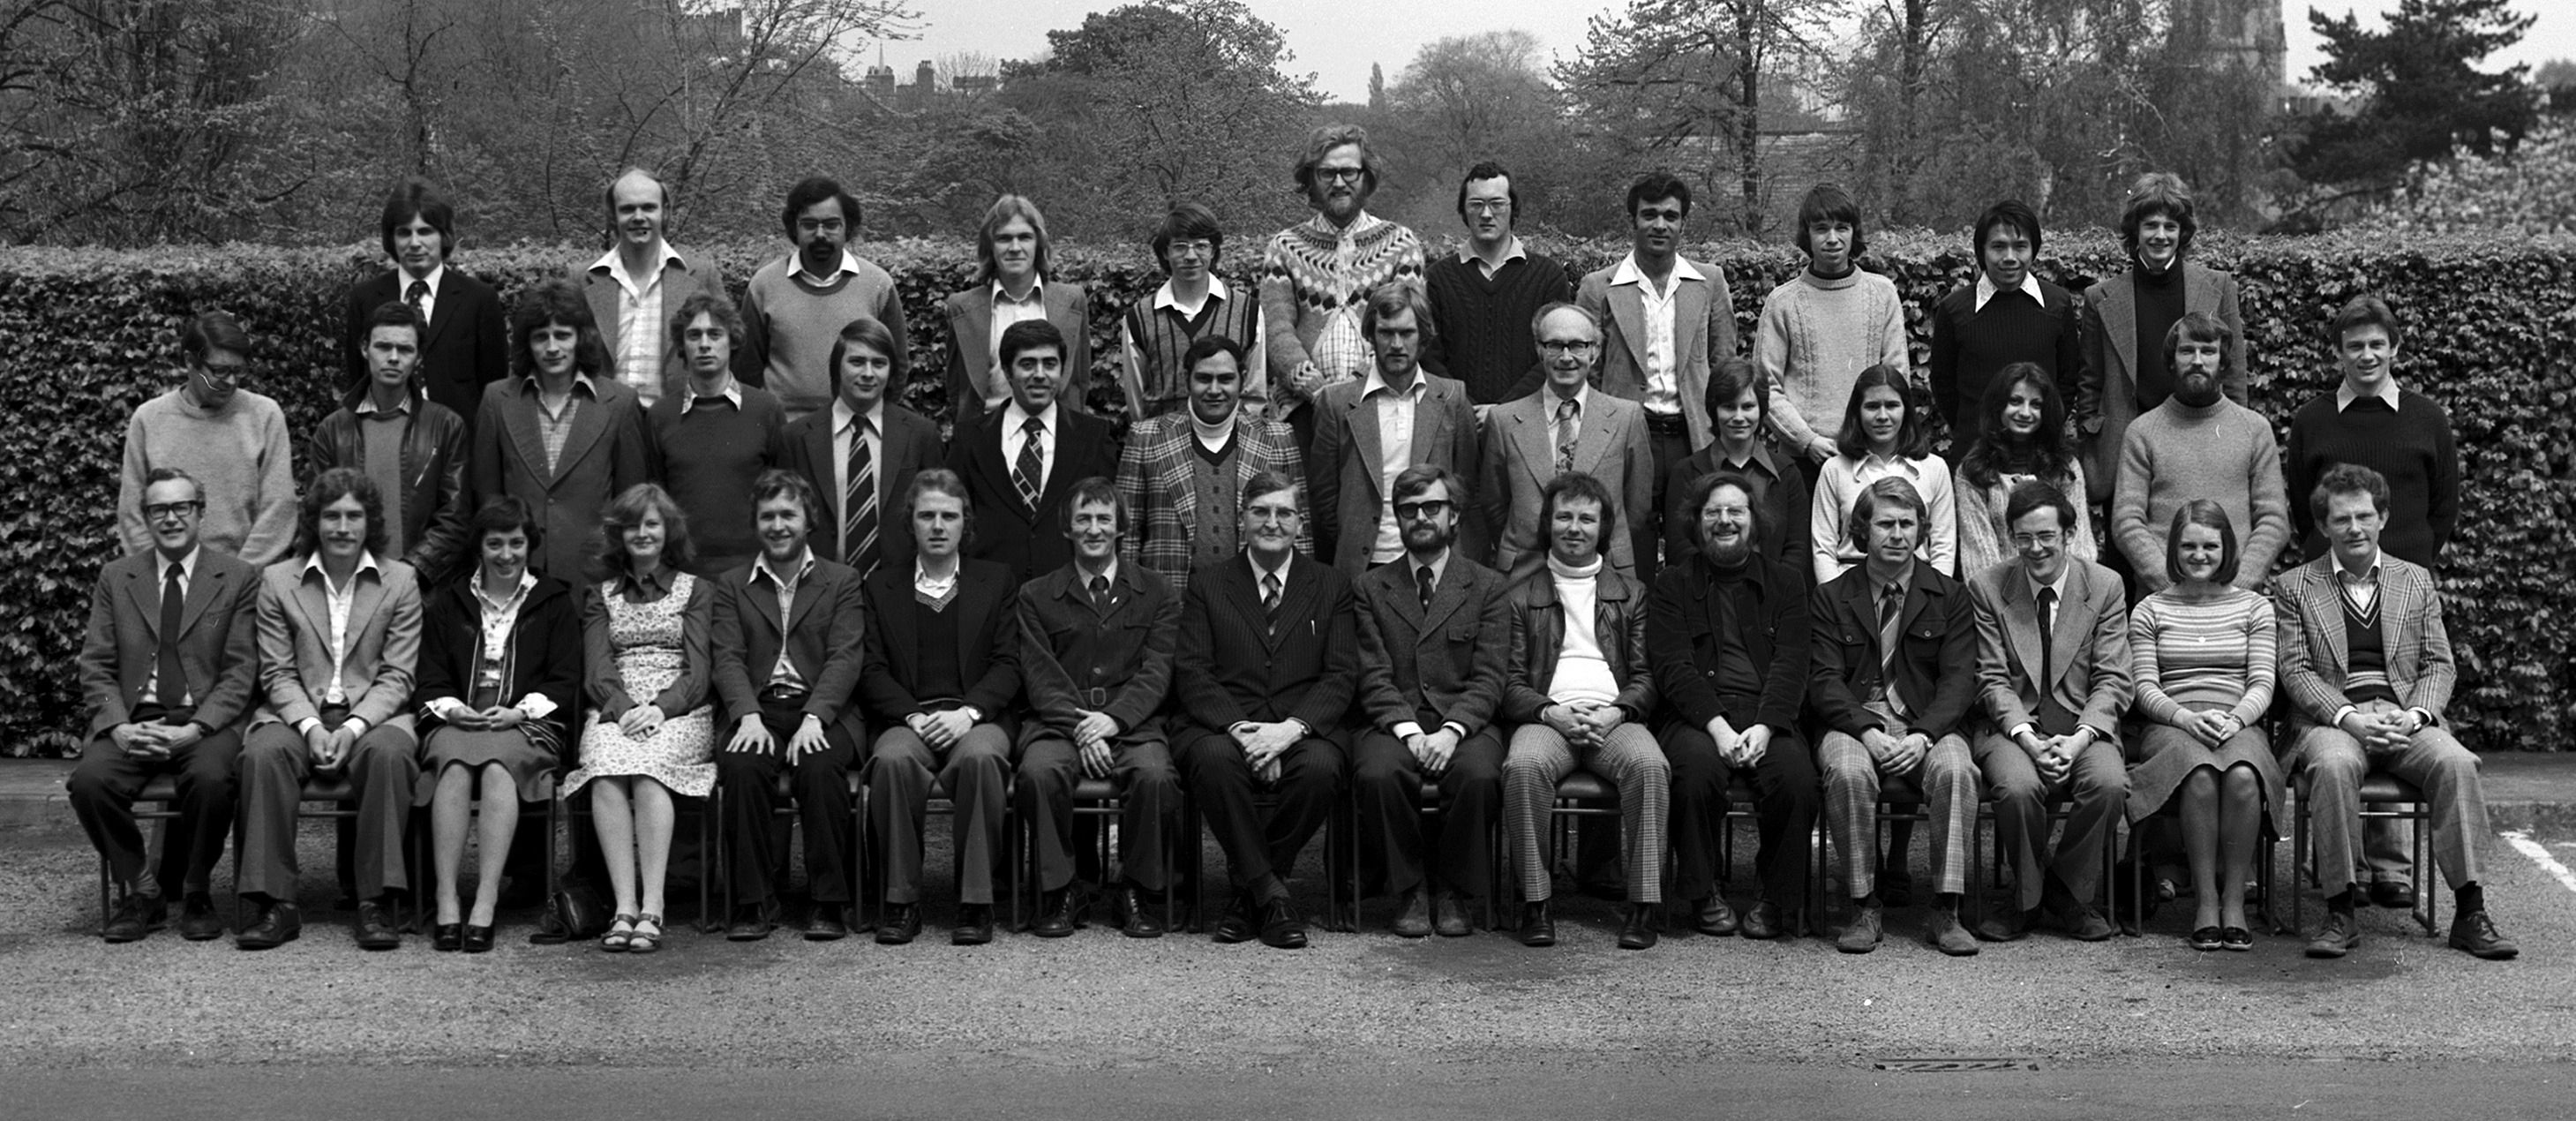 Geography Department Postgraduate Group photo from 1977